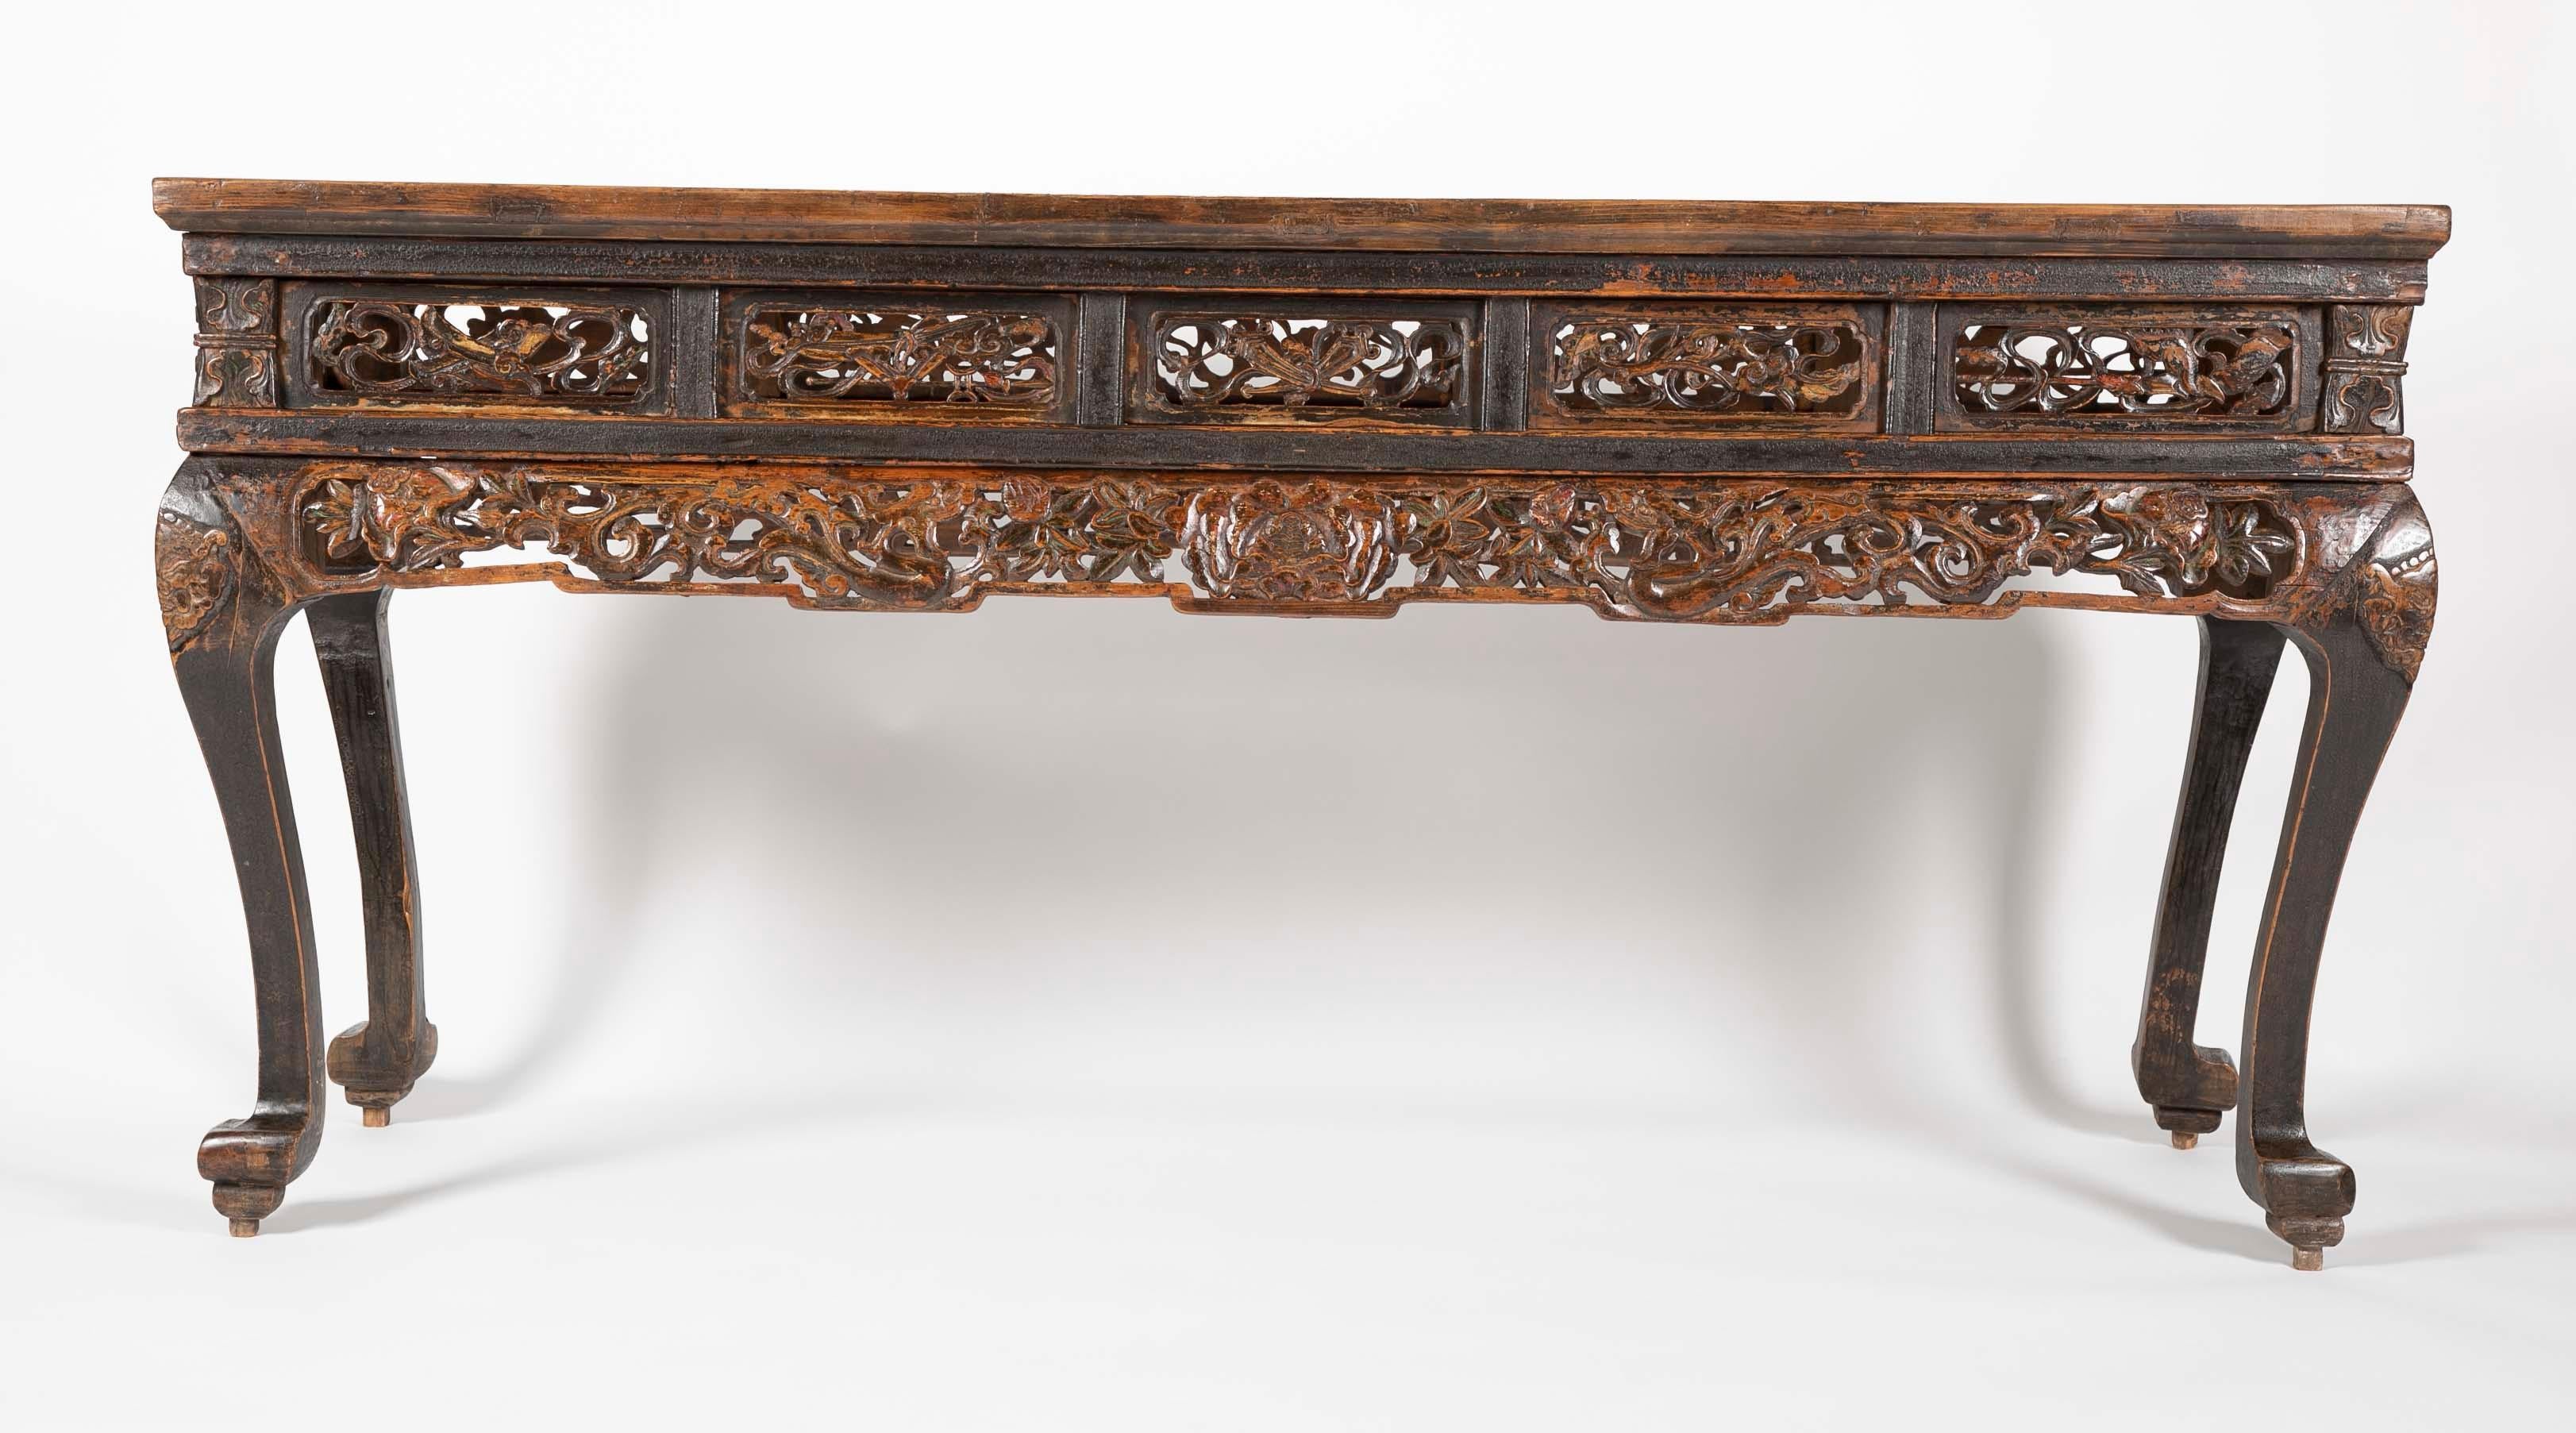 A handsome 19th century Chinese altar table with traces of the original paint. The apron decorated with open-work carvings of a central lotus flower flanked by dragons and pomegranates. The knees of the elegant cabriole legs carved with masks of